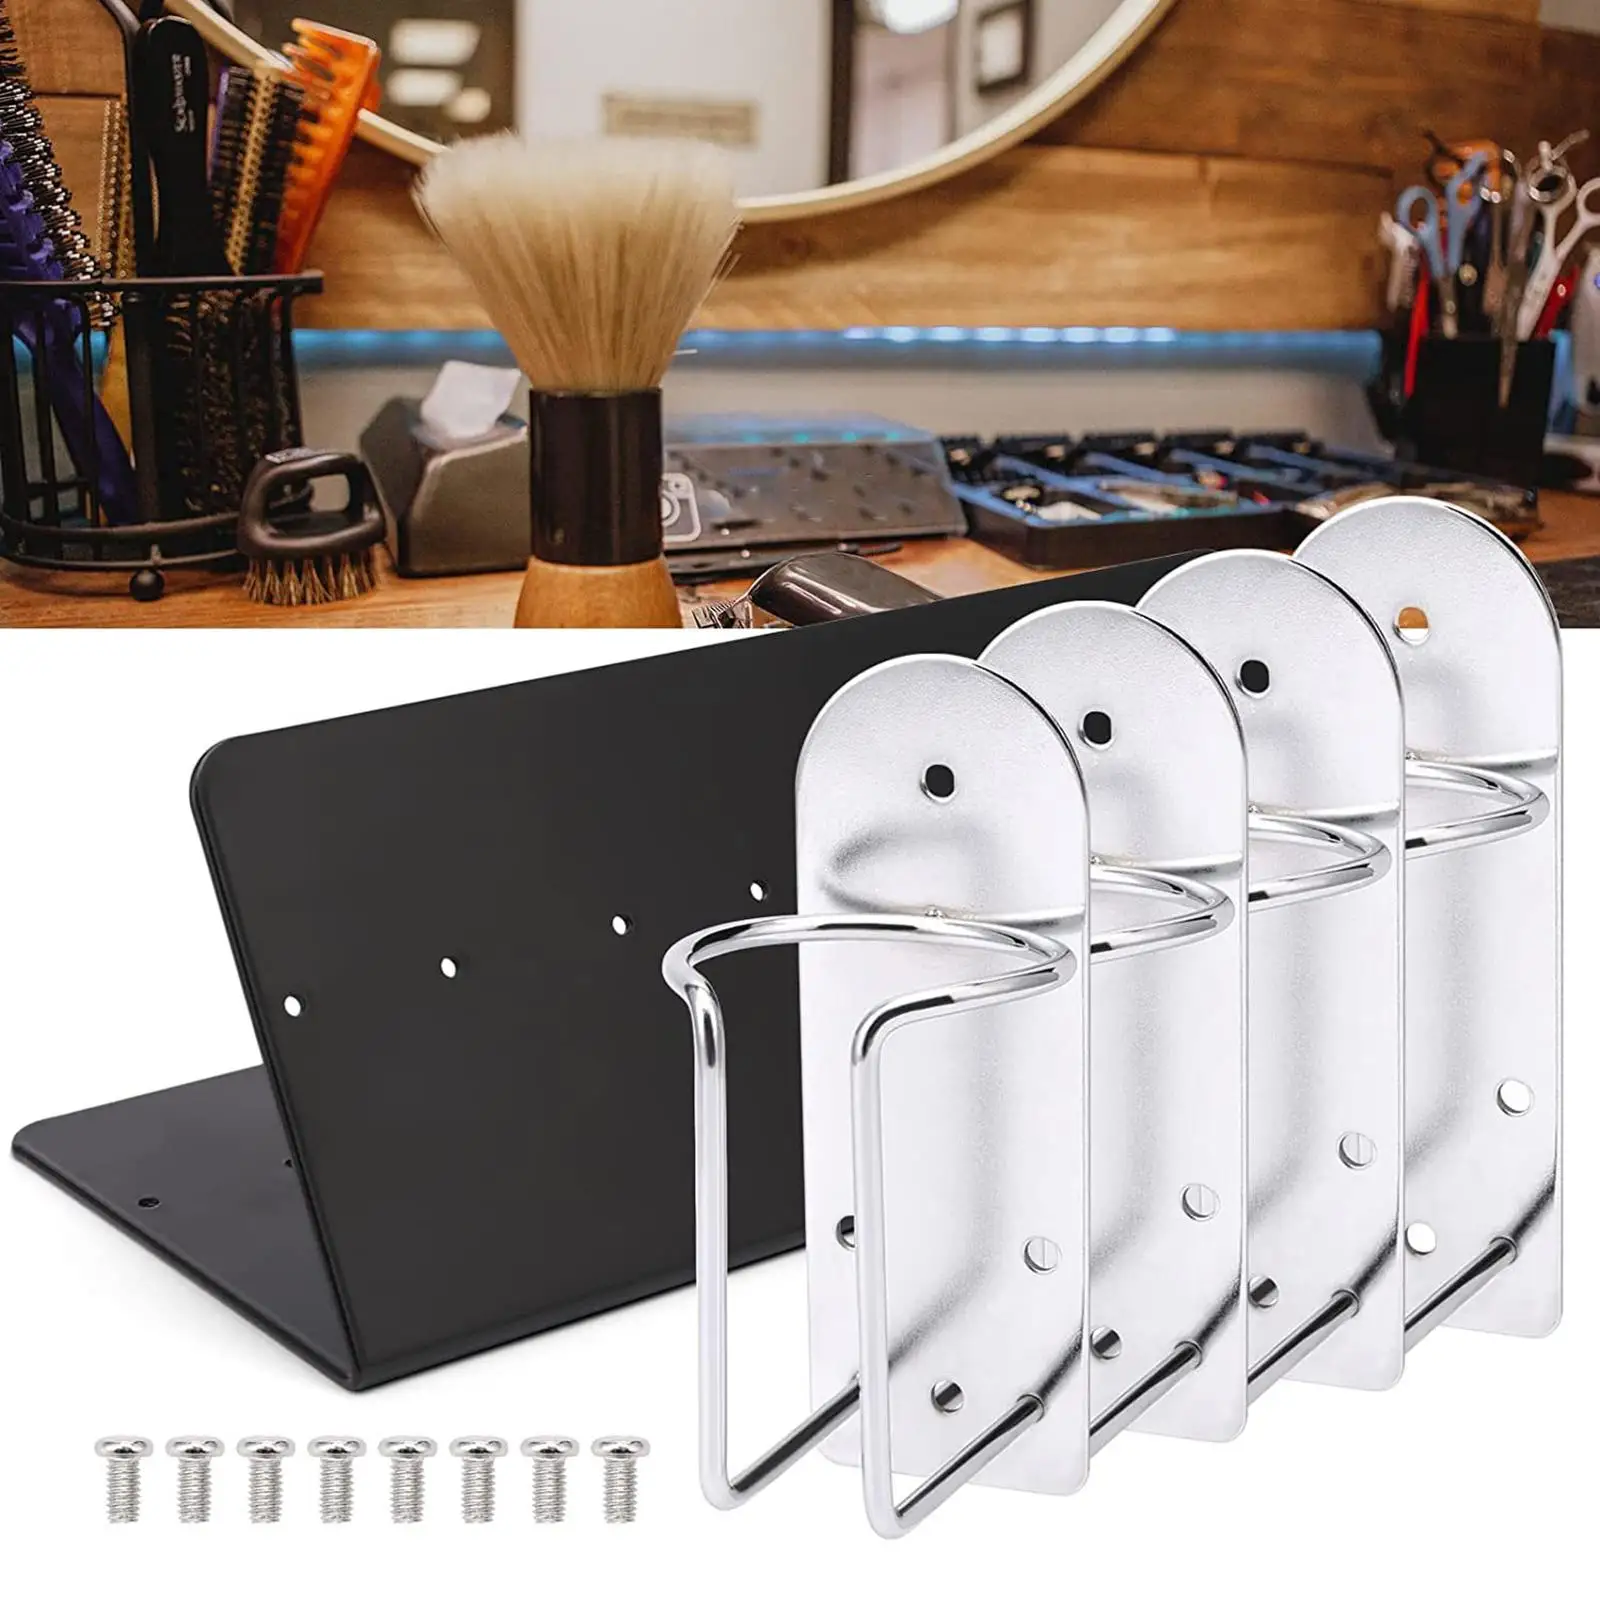 4 Slots Hair Clipper Holder, Salon Beard Shaver Rack, Electric Hair Clipper Holder Stand, for Barbers Hairstylist